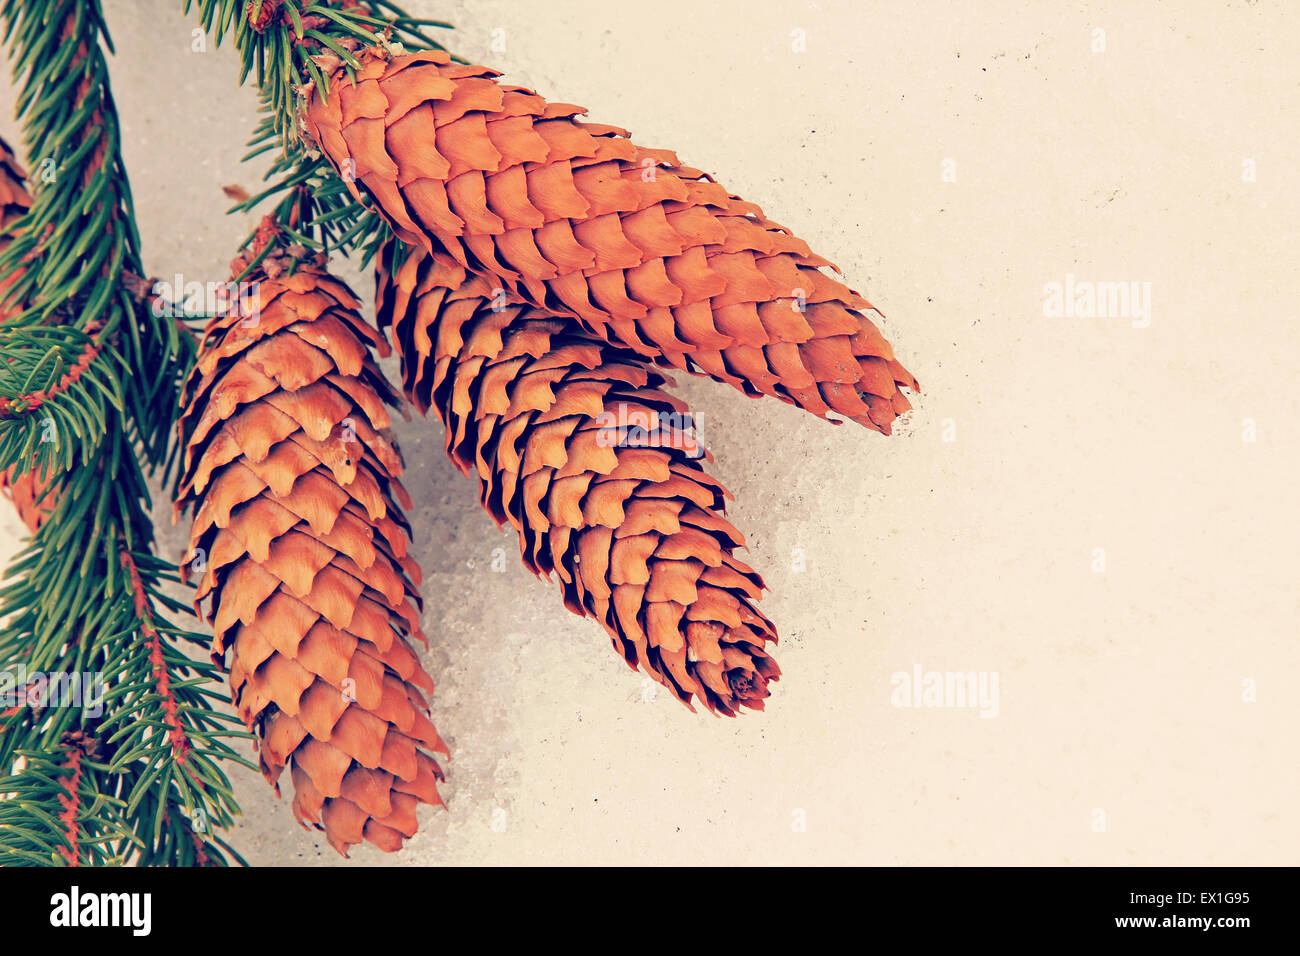 Fir cone on a winter snow background.Toned image. Stock Photo